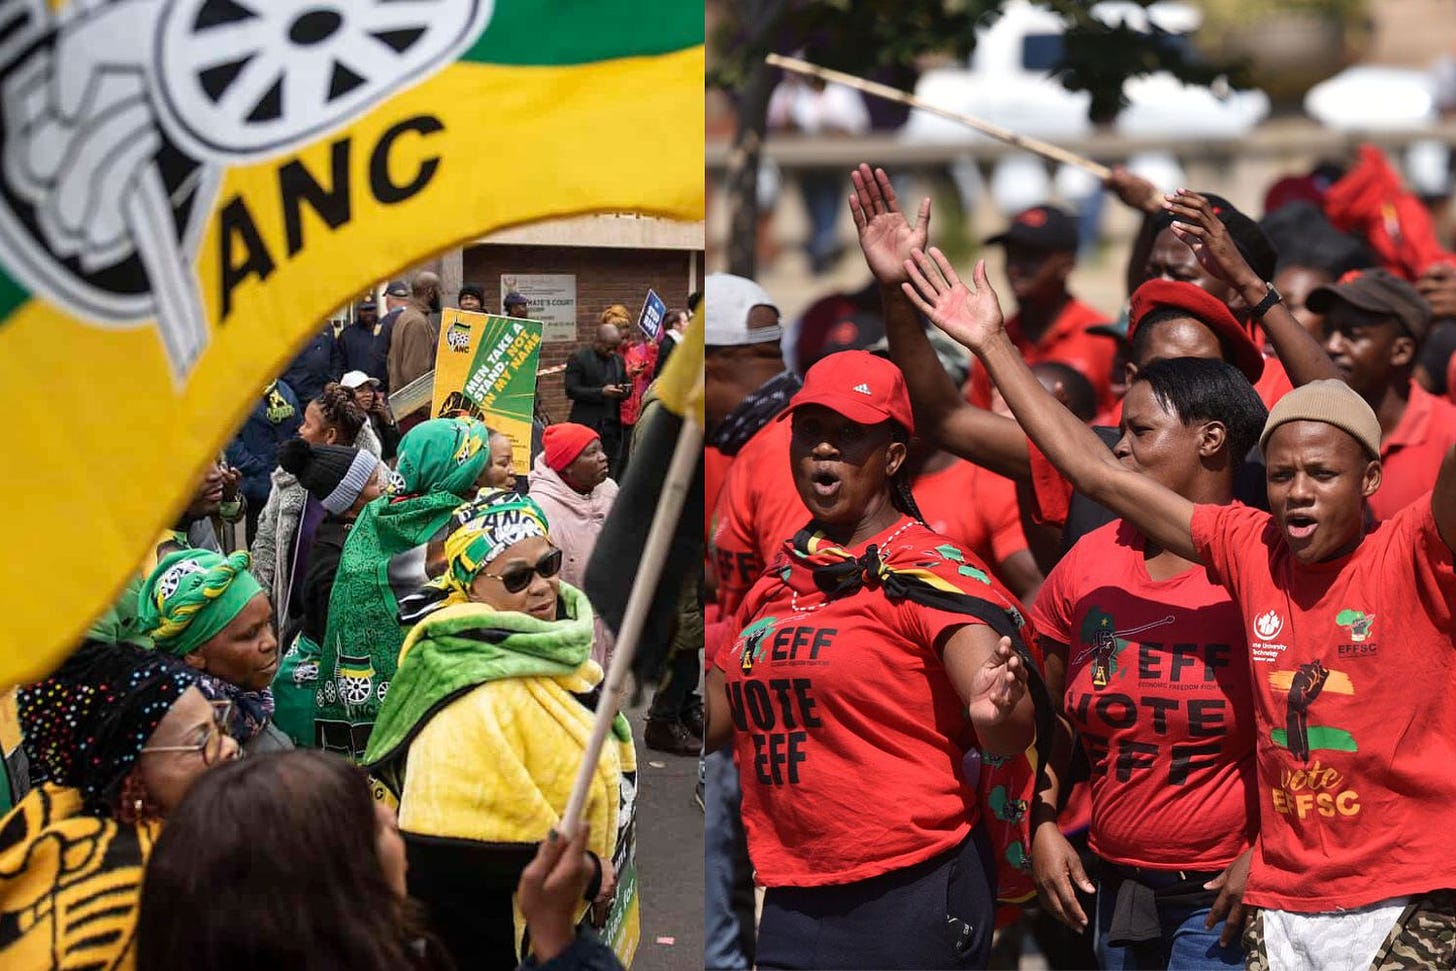 Will ANC-EFF coalition fast track Malema’s ambitions to be the head of state in 2029?